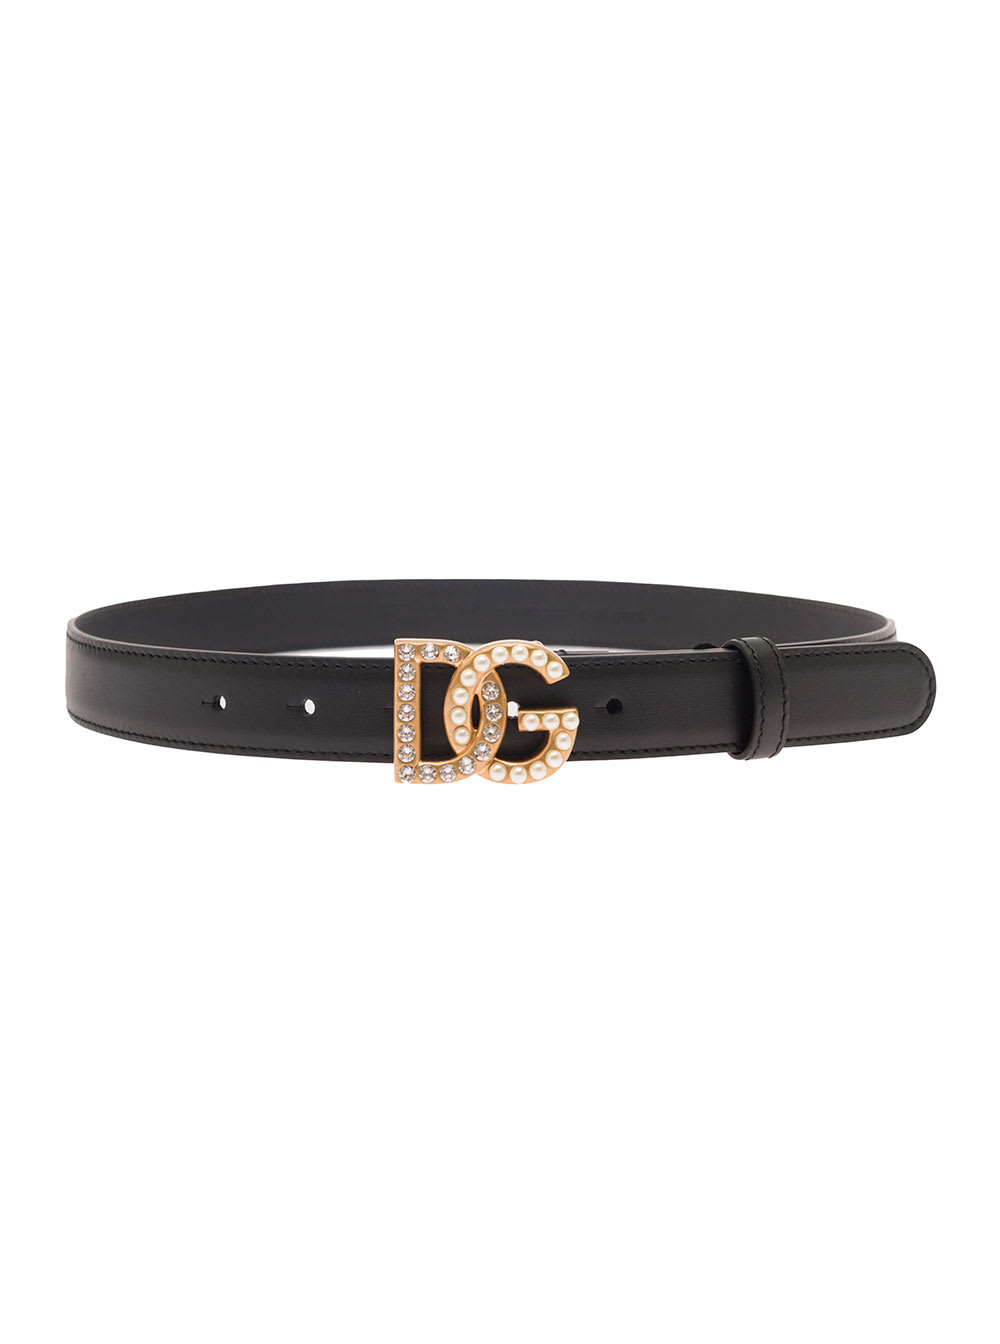 Dolce & Gabbana Black Belt With Dg Logo Buckle With Pearls And Rhinestones In Smooth Leather Woman